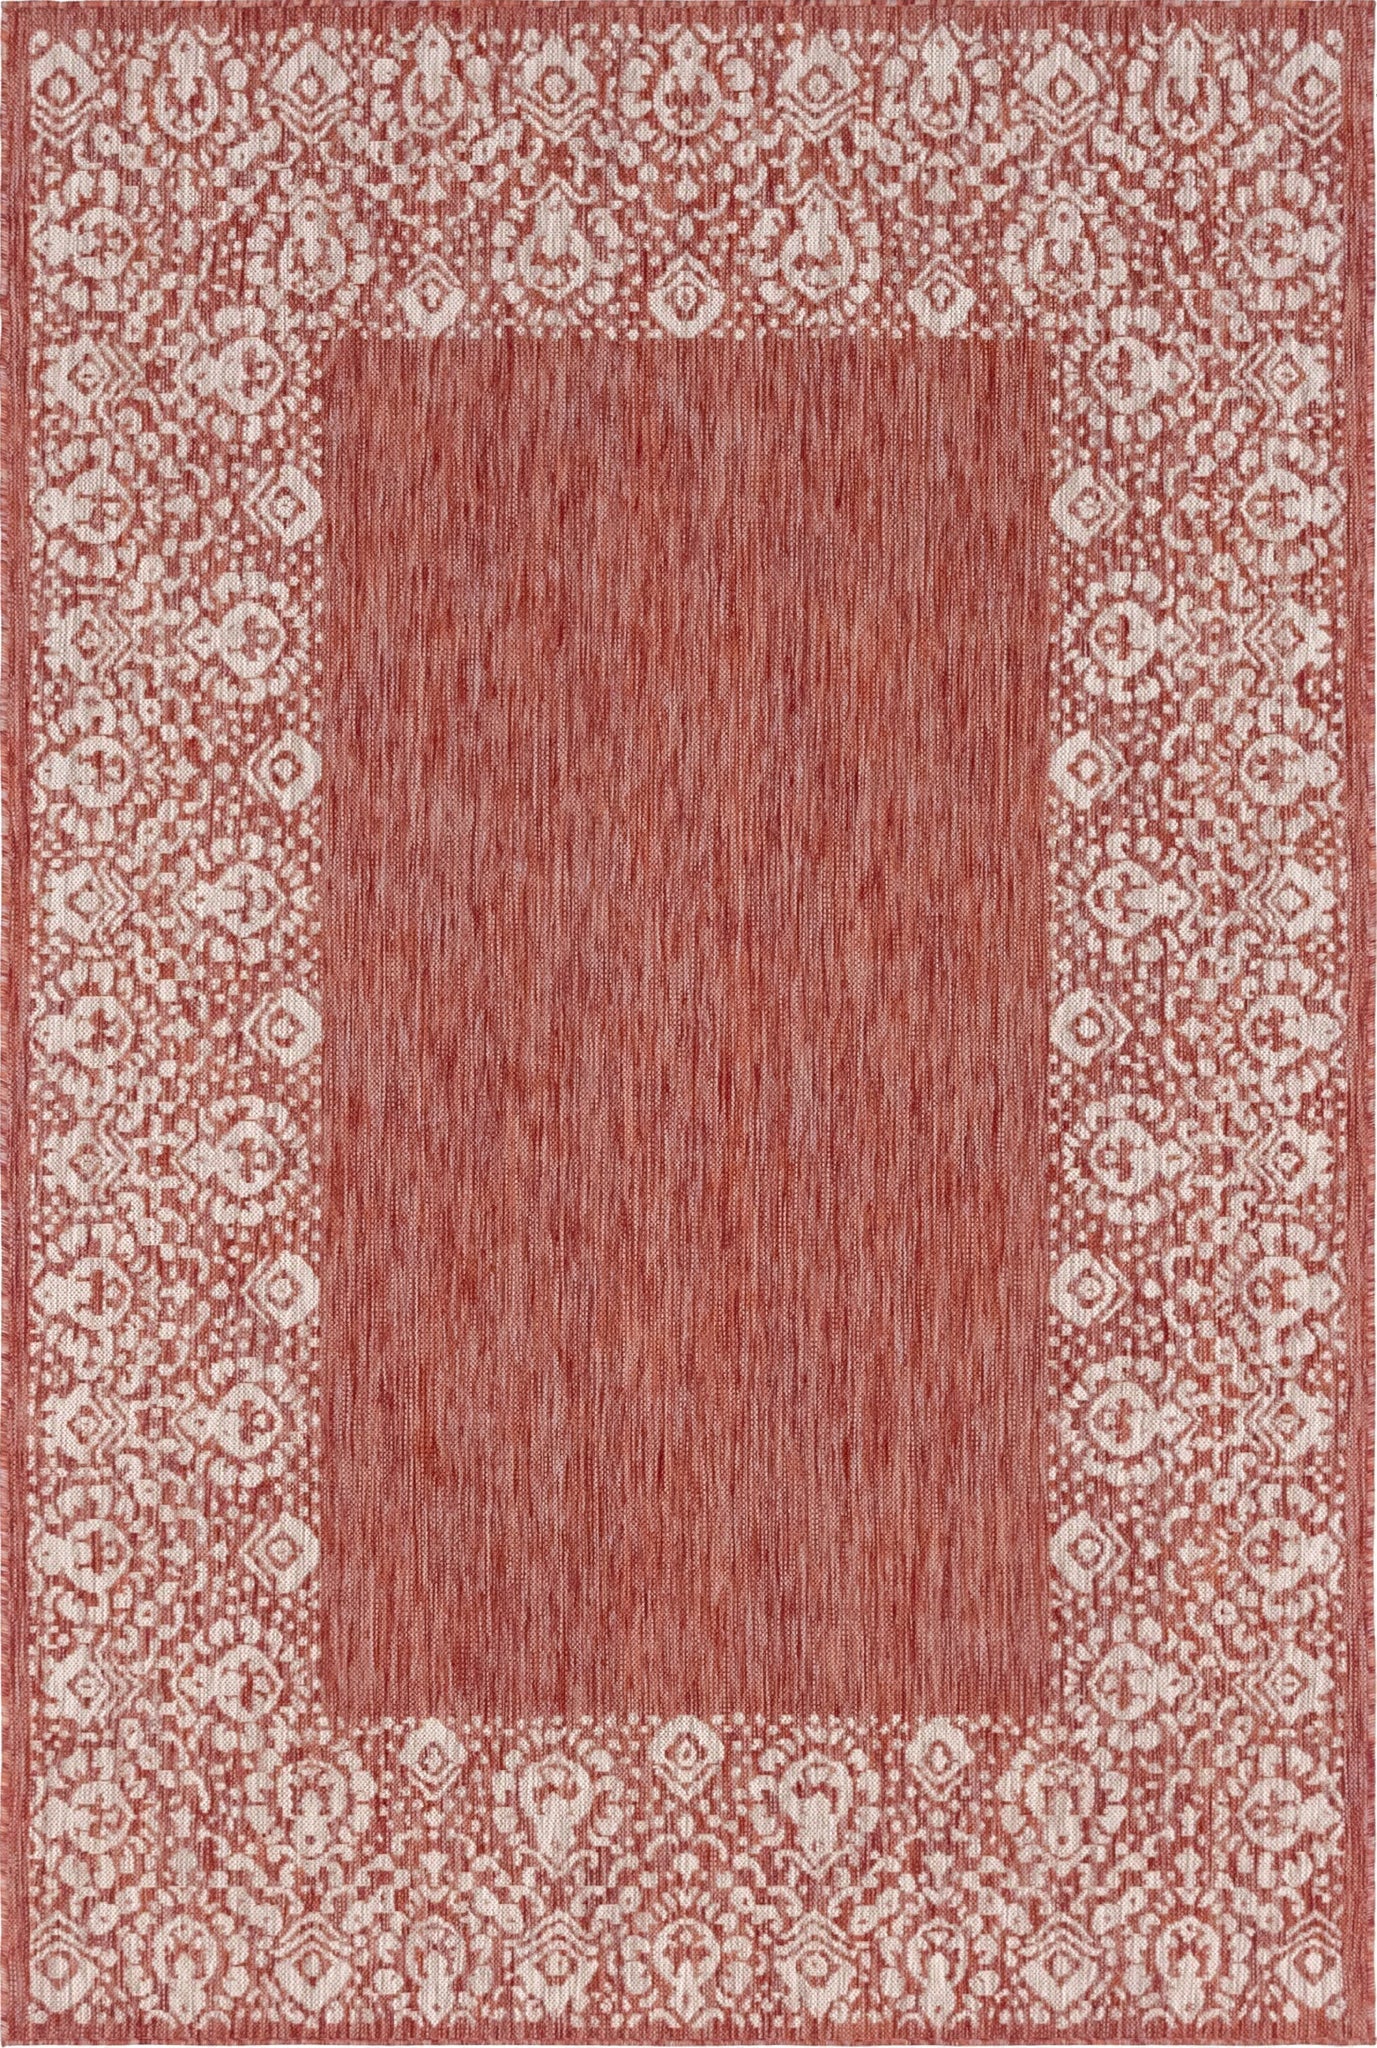 Unique Loom Outdoor Border T-KZOD1 Rust Red Area Rug main image